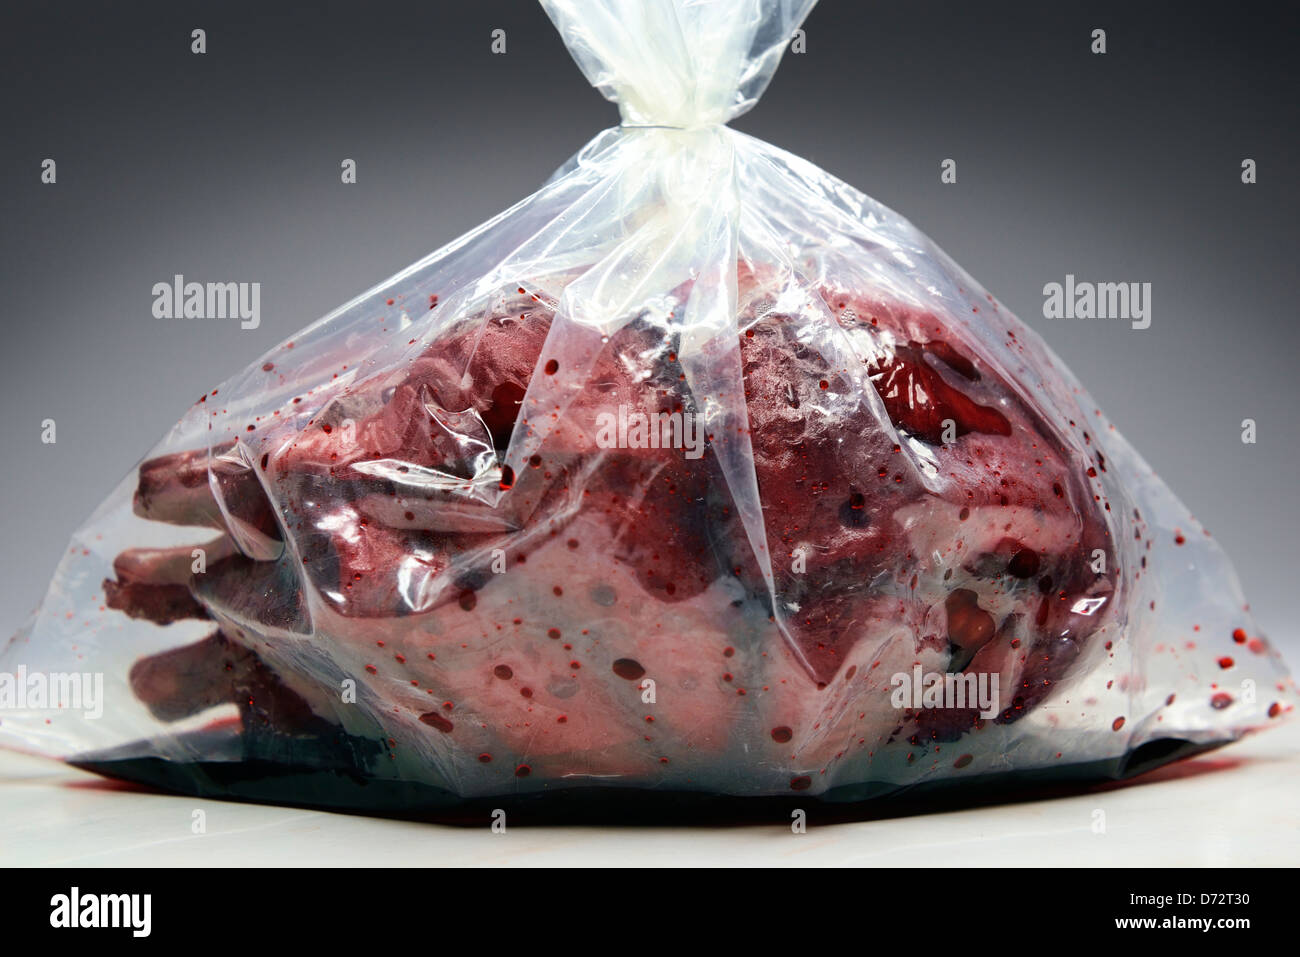 Heart in a plastic bag, symbolic photo organ donation scandal Stock Photo